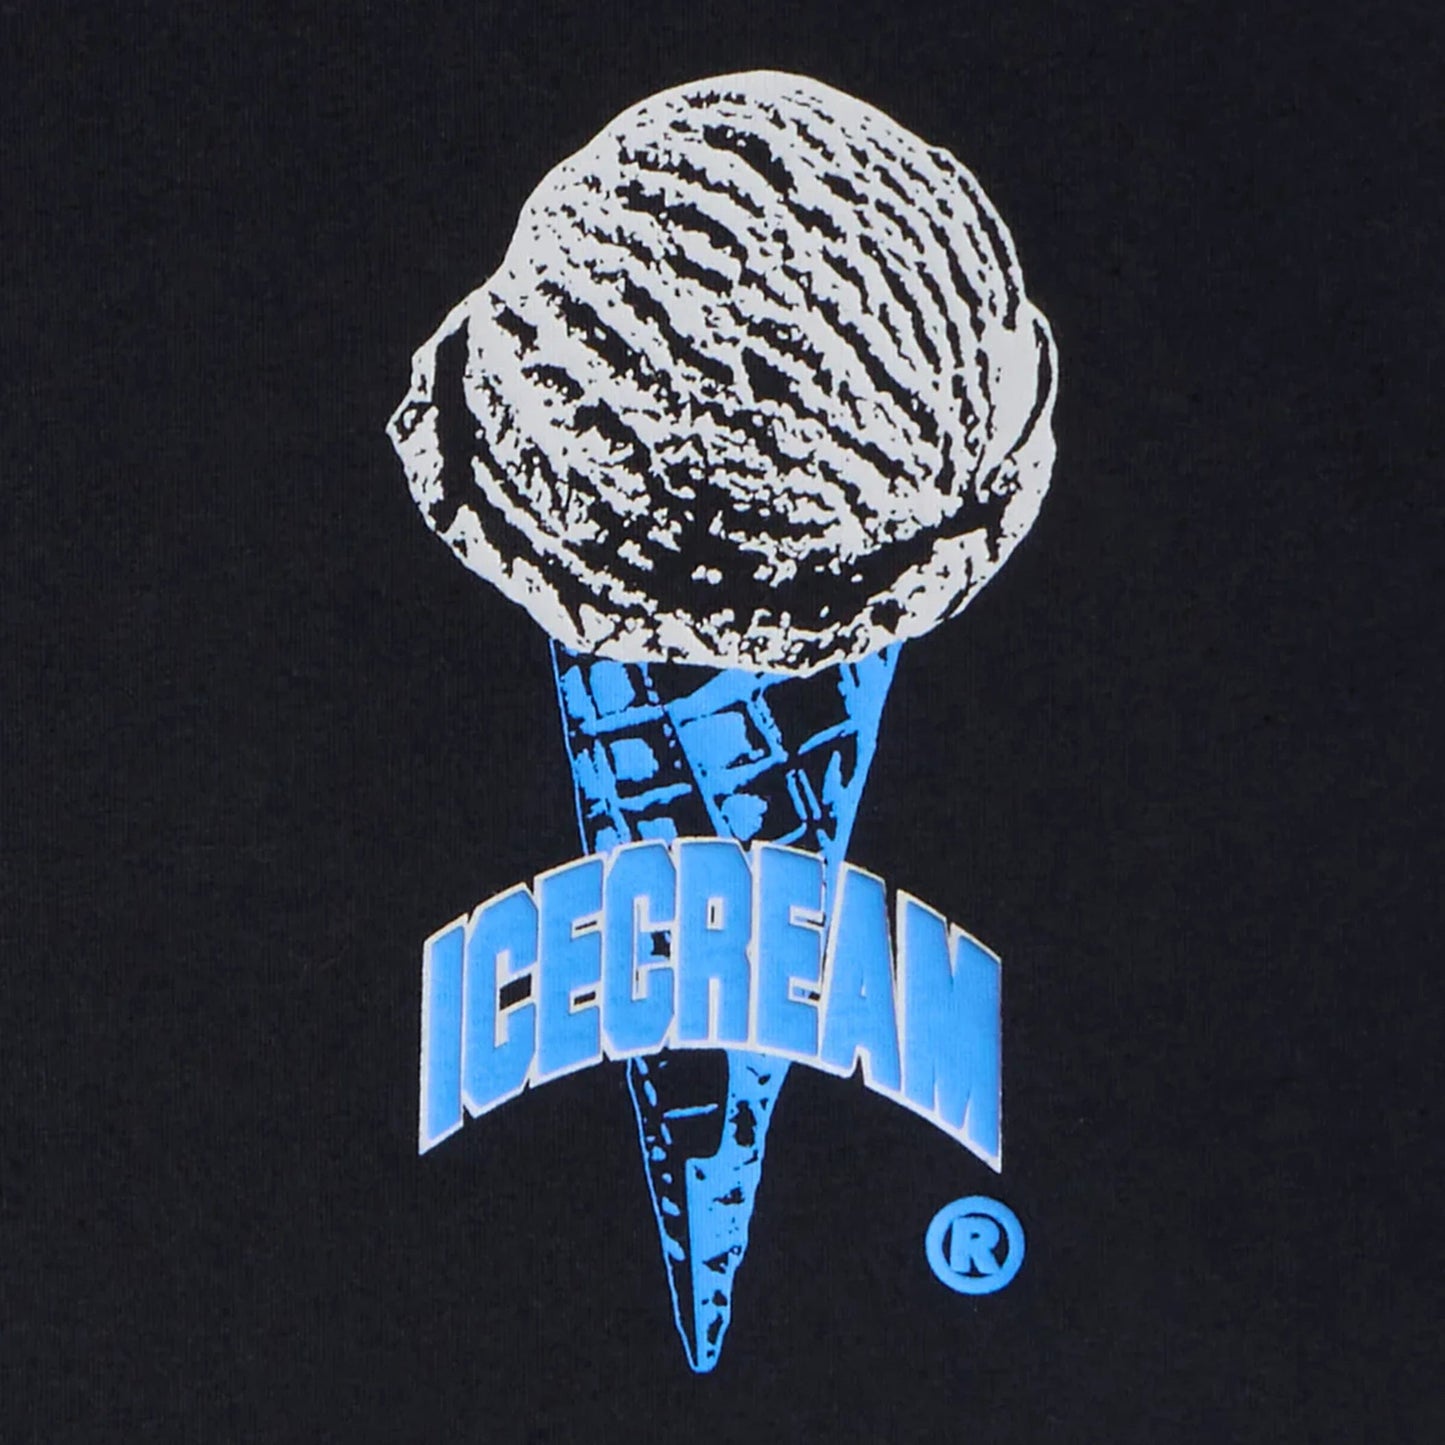 ICECREAM T-Shirts OUT OF THIS WORLD T-SHIRT (OVERSIZED)